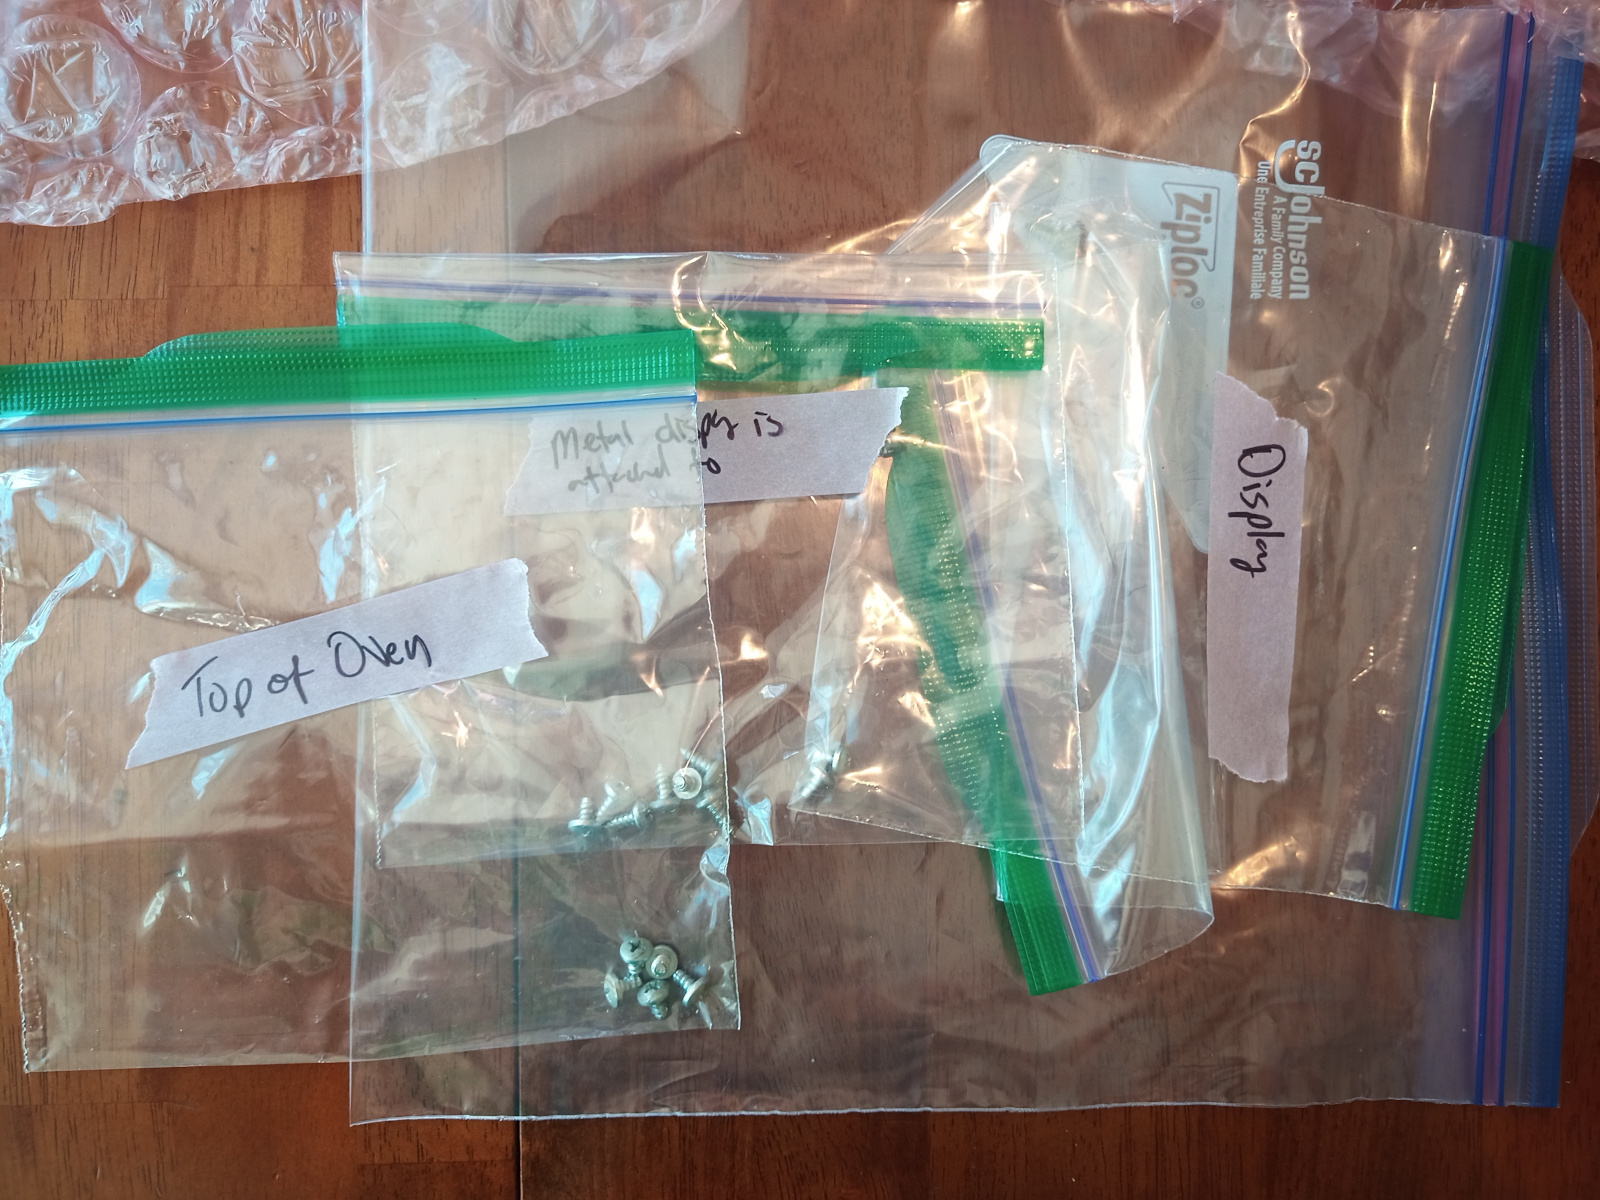 Labeled plastic bags with screws.